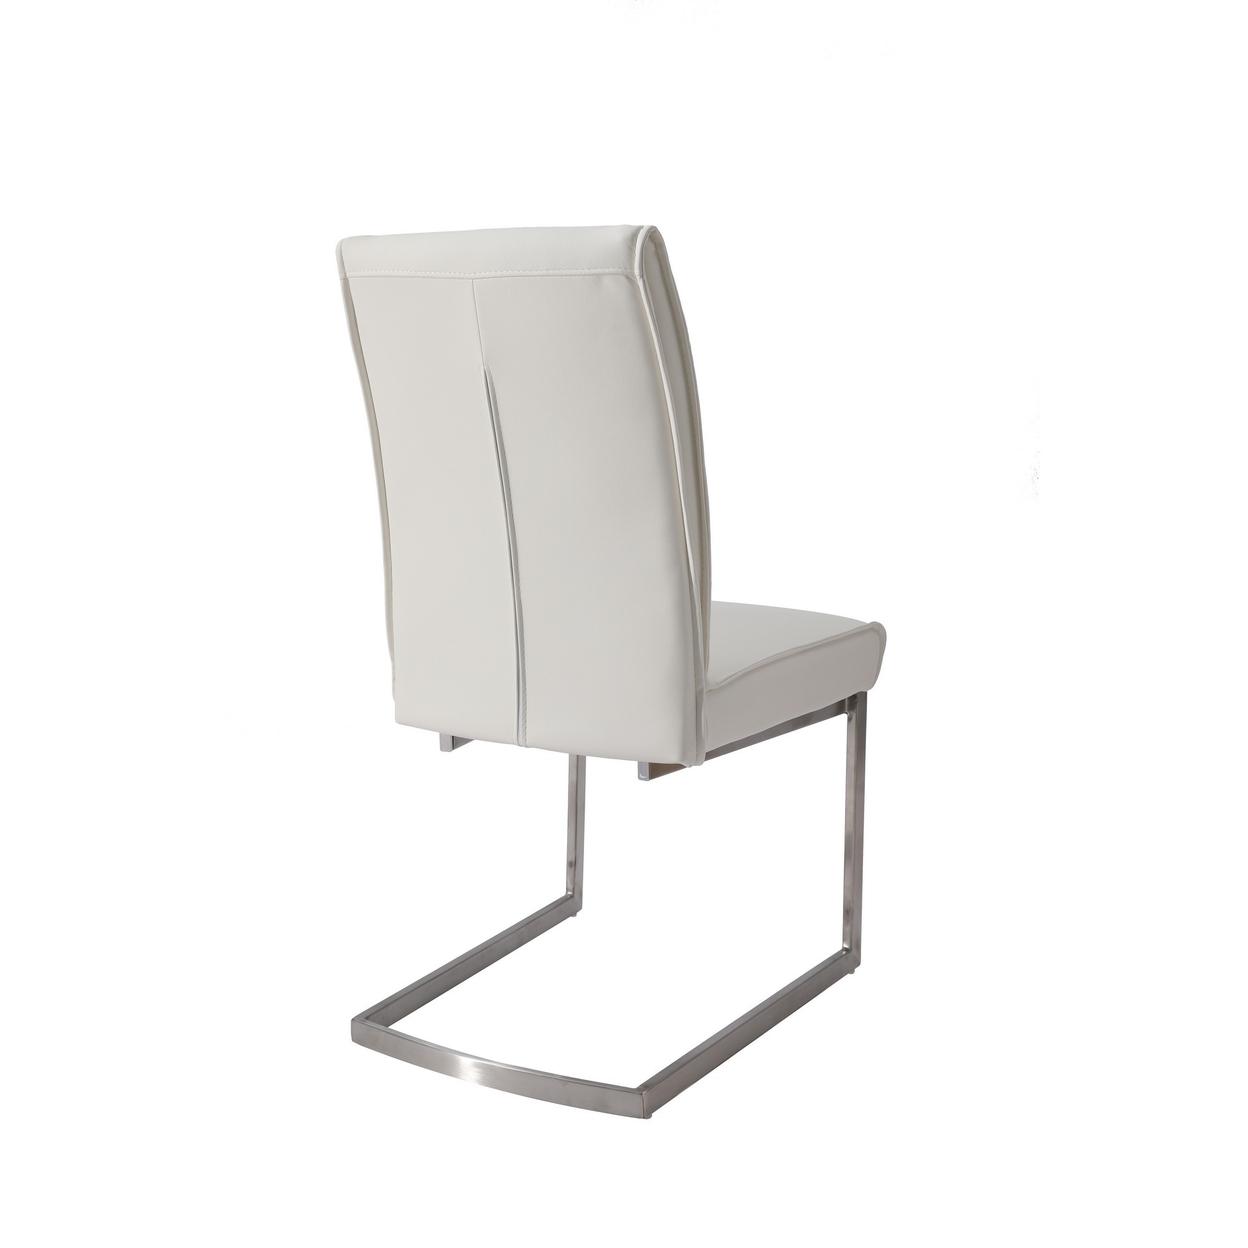 Leatherette Dining Chair With Breuer Style, Set Of 2, White- Saltoro Sherpi